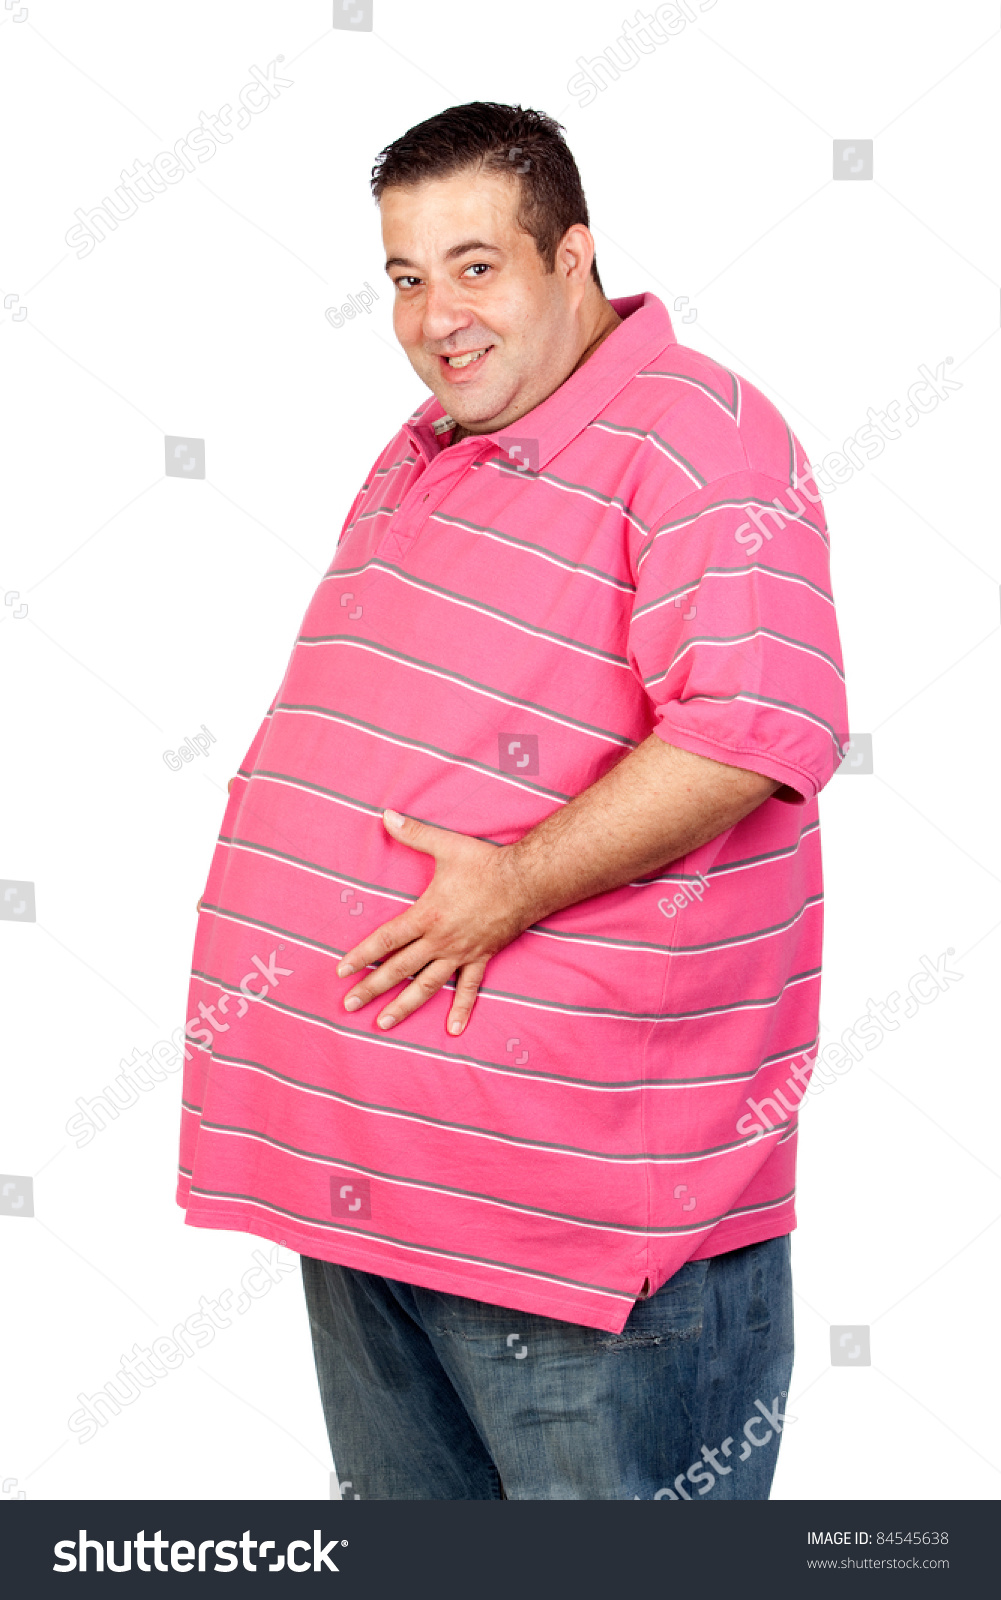 Image result for Fat guy in pink shirt